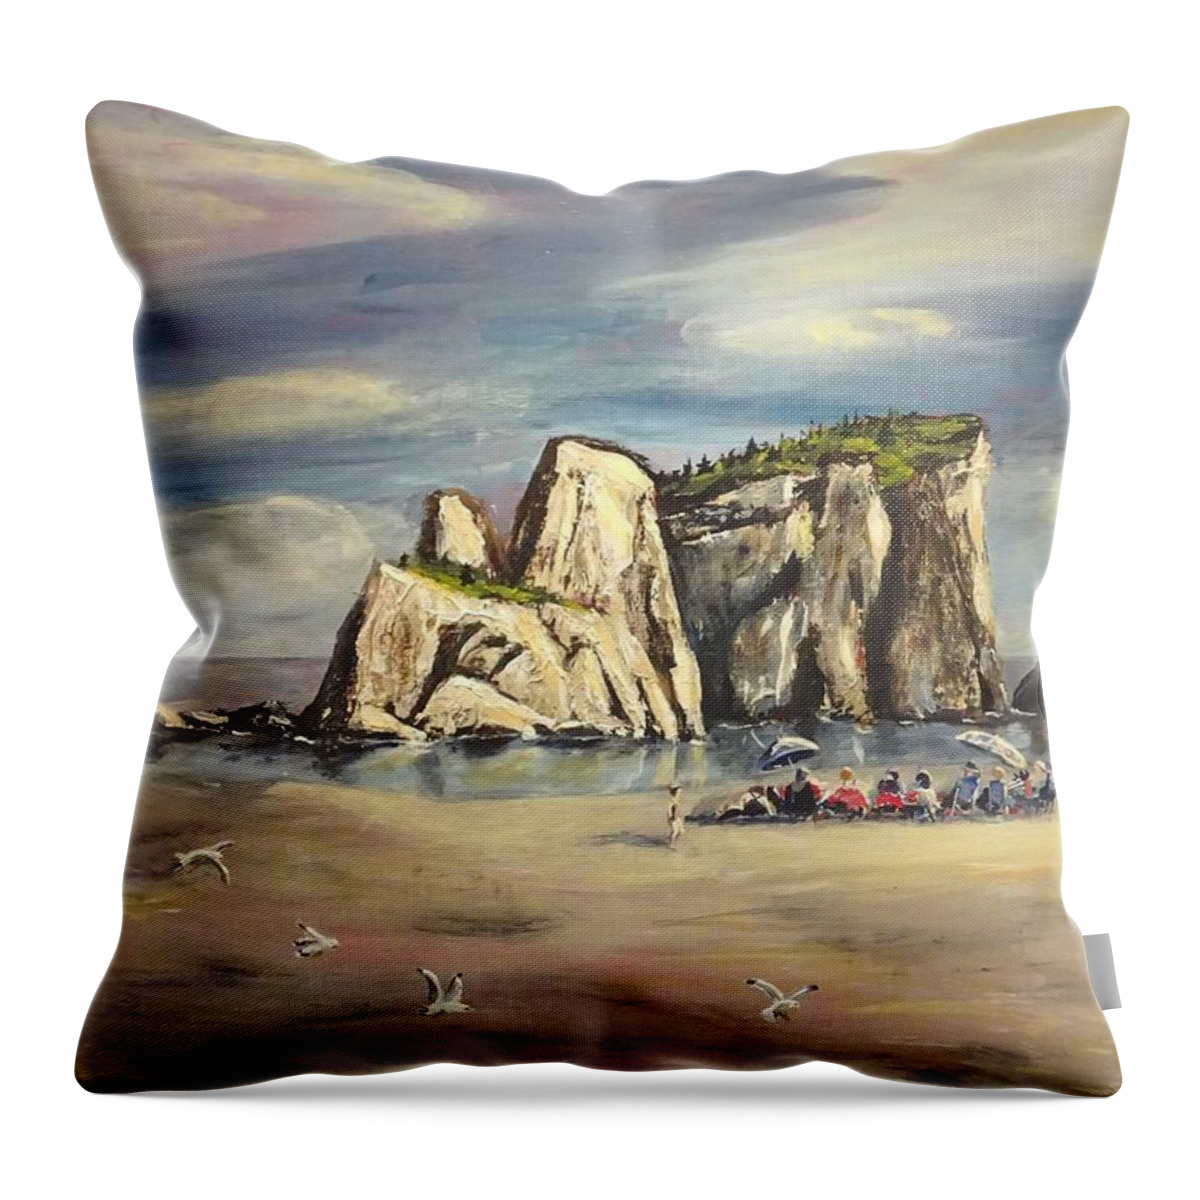 Summer Throw Pillow featuring the painting Salmon Cove Summer Afternoon by Brent Arlitt